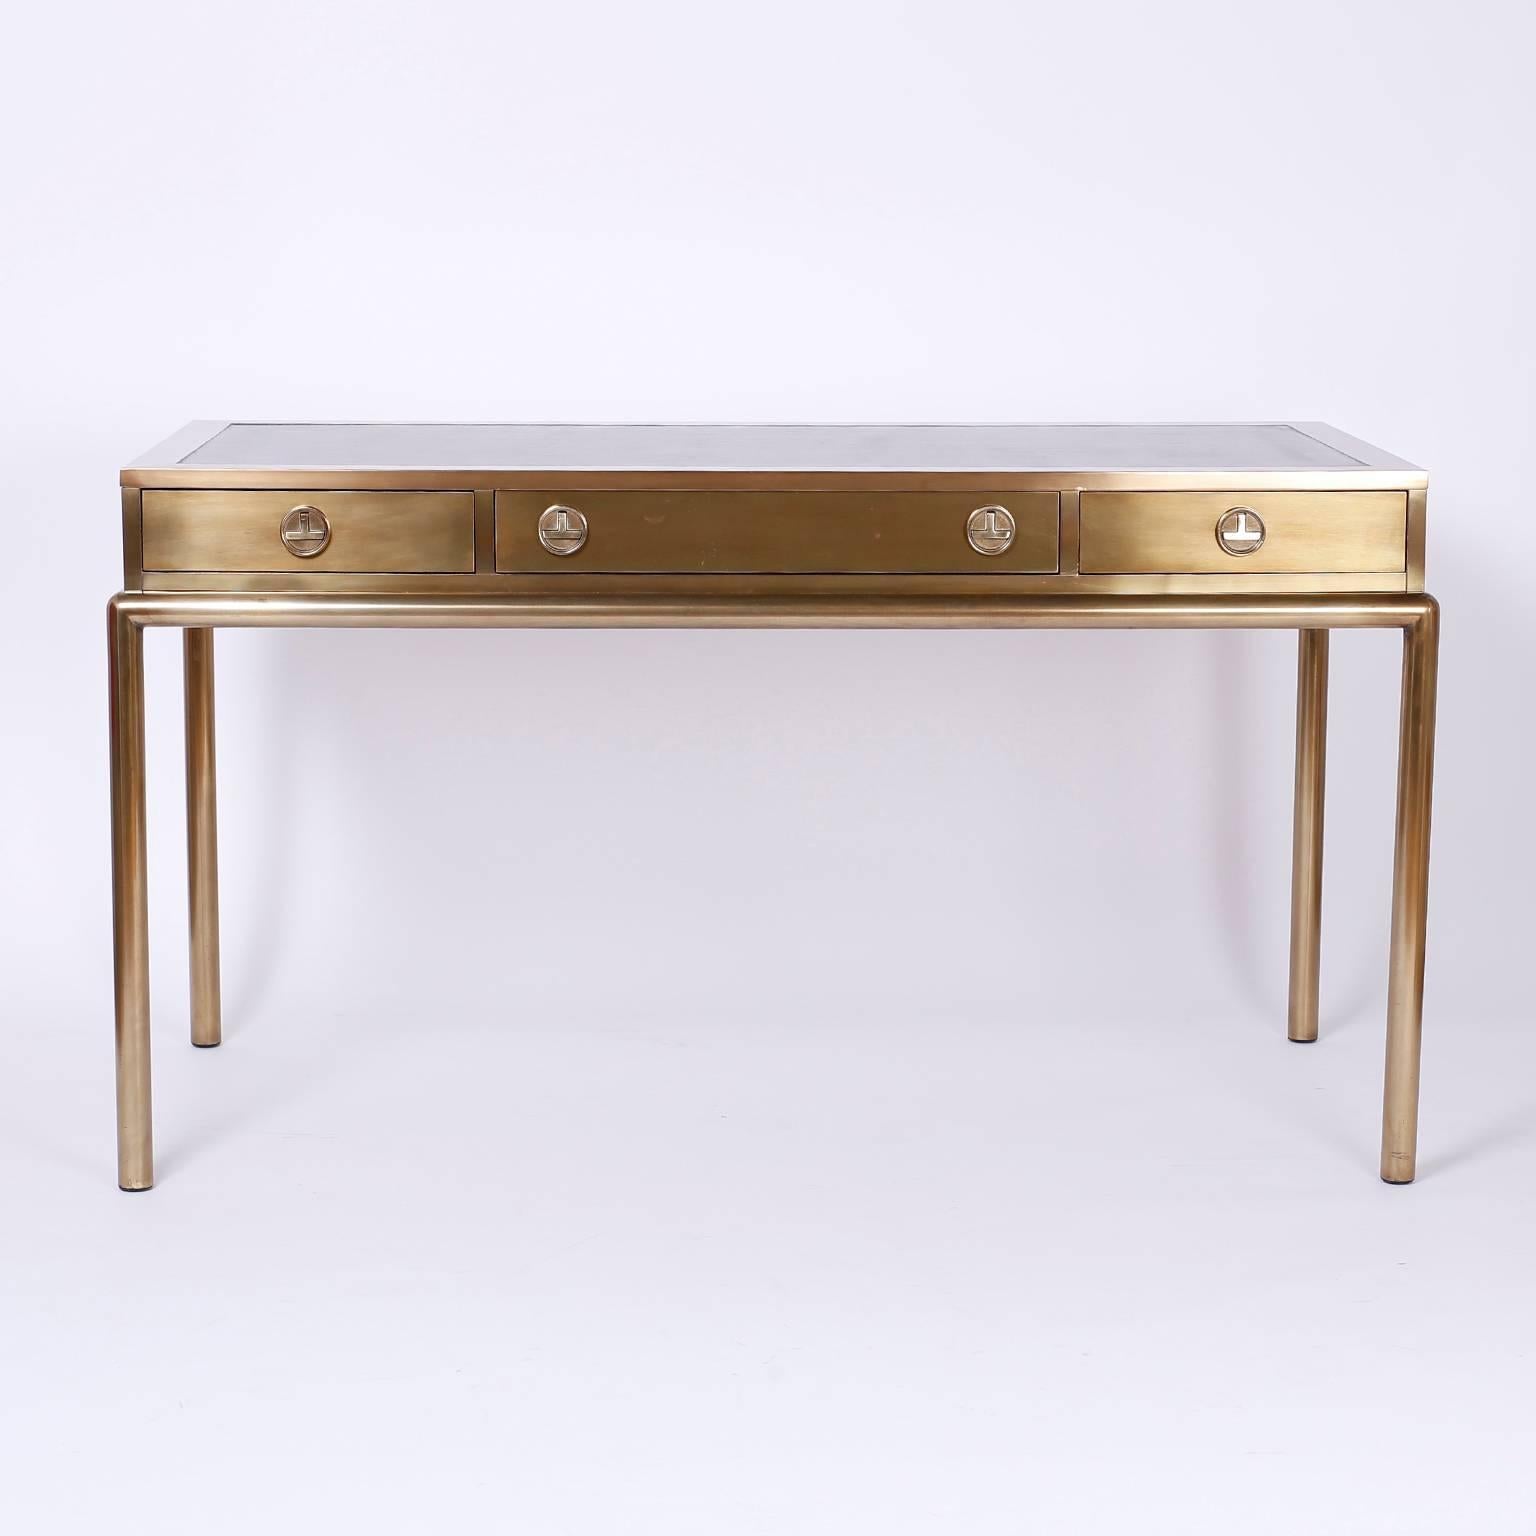 Chic brass bureauplat or desk with a clean no nonsense form, and a chinoiserie vibe. The top has a brown leather surface. The drawer pulls have stylized modern Campaign influences. The round legs complete the sleek design. The brass is lacquered for